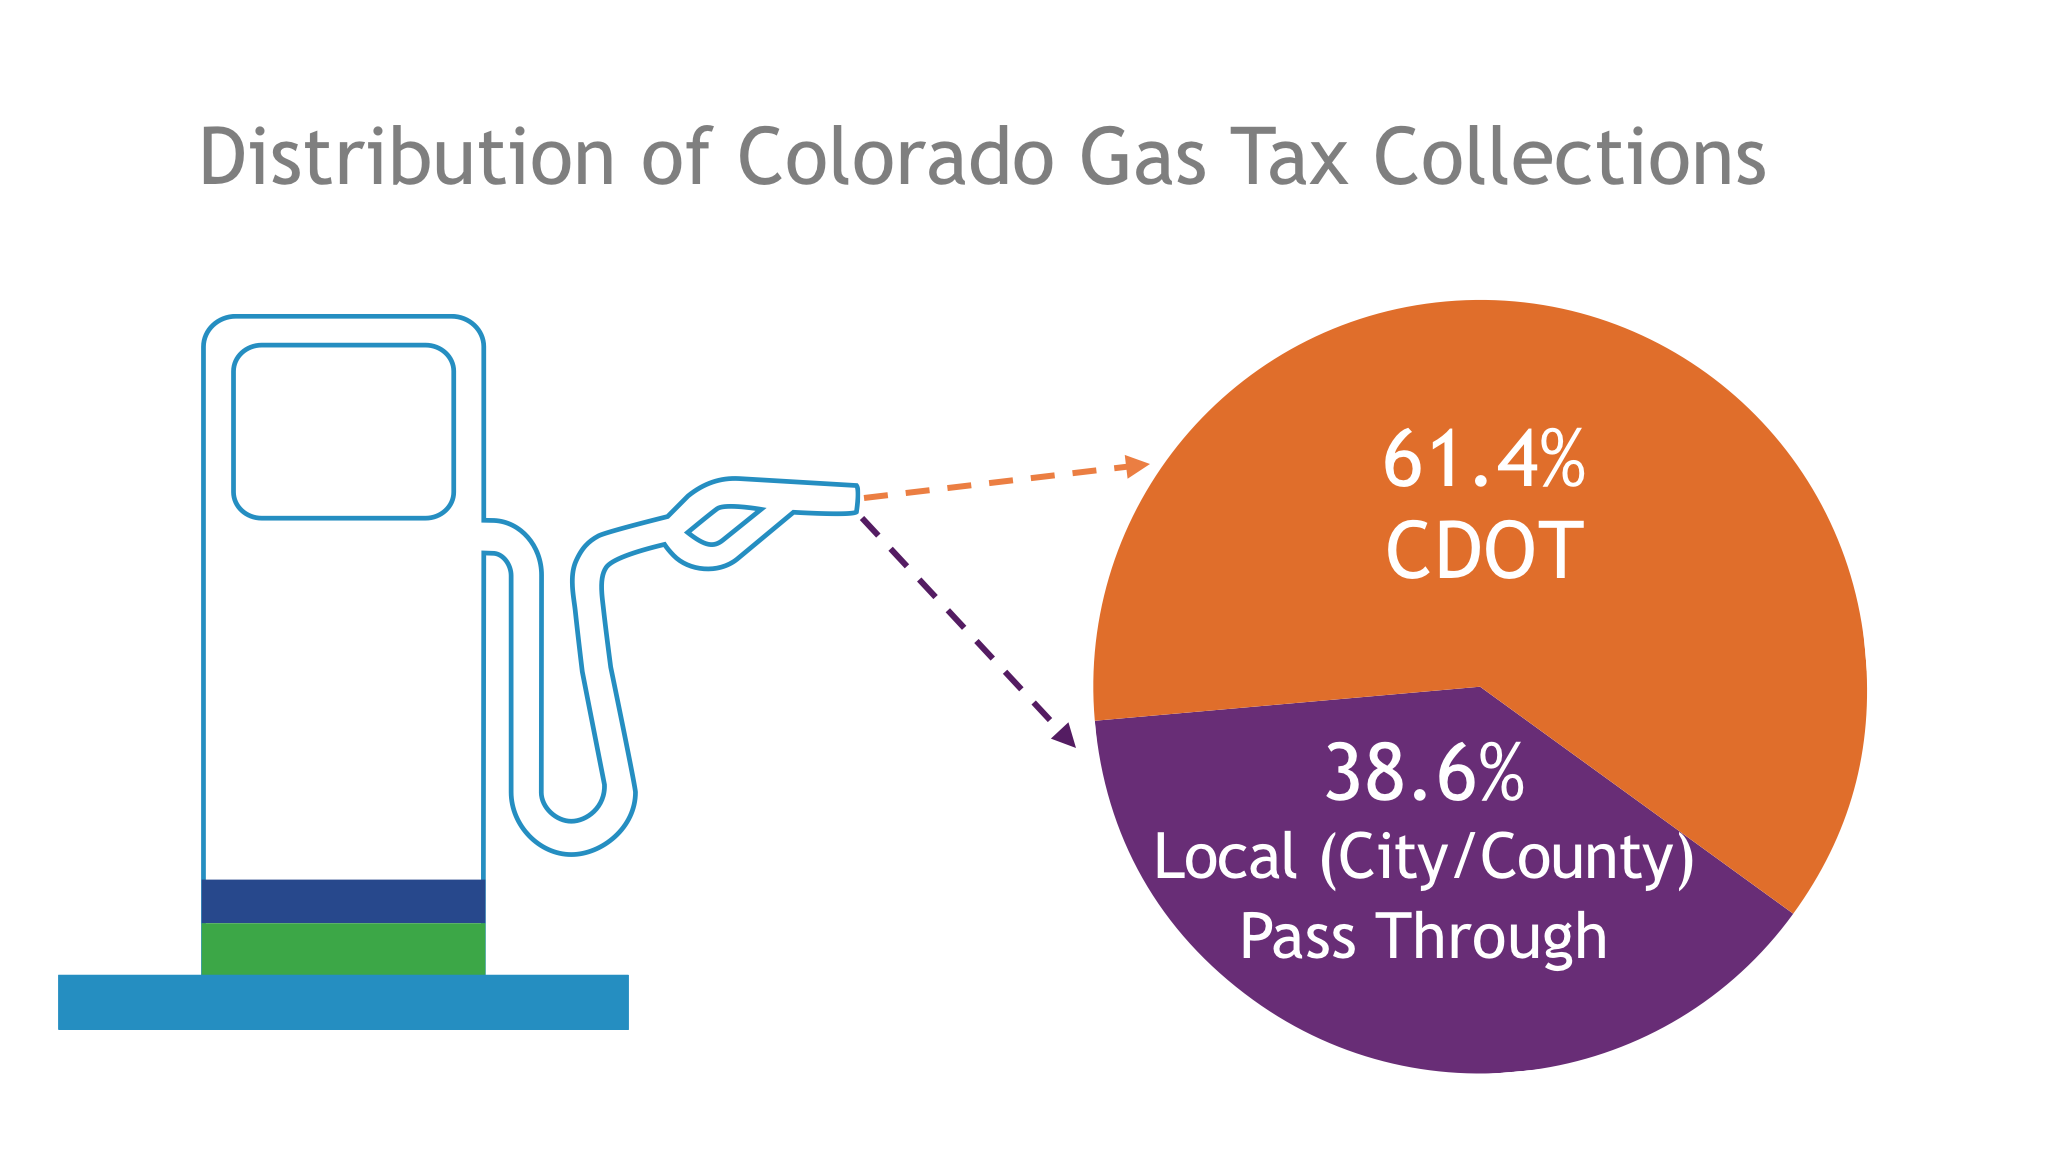 GAS Tax collections.png detail image